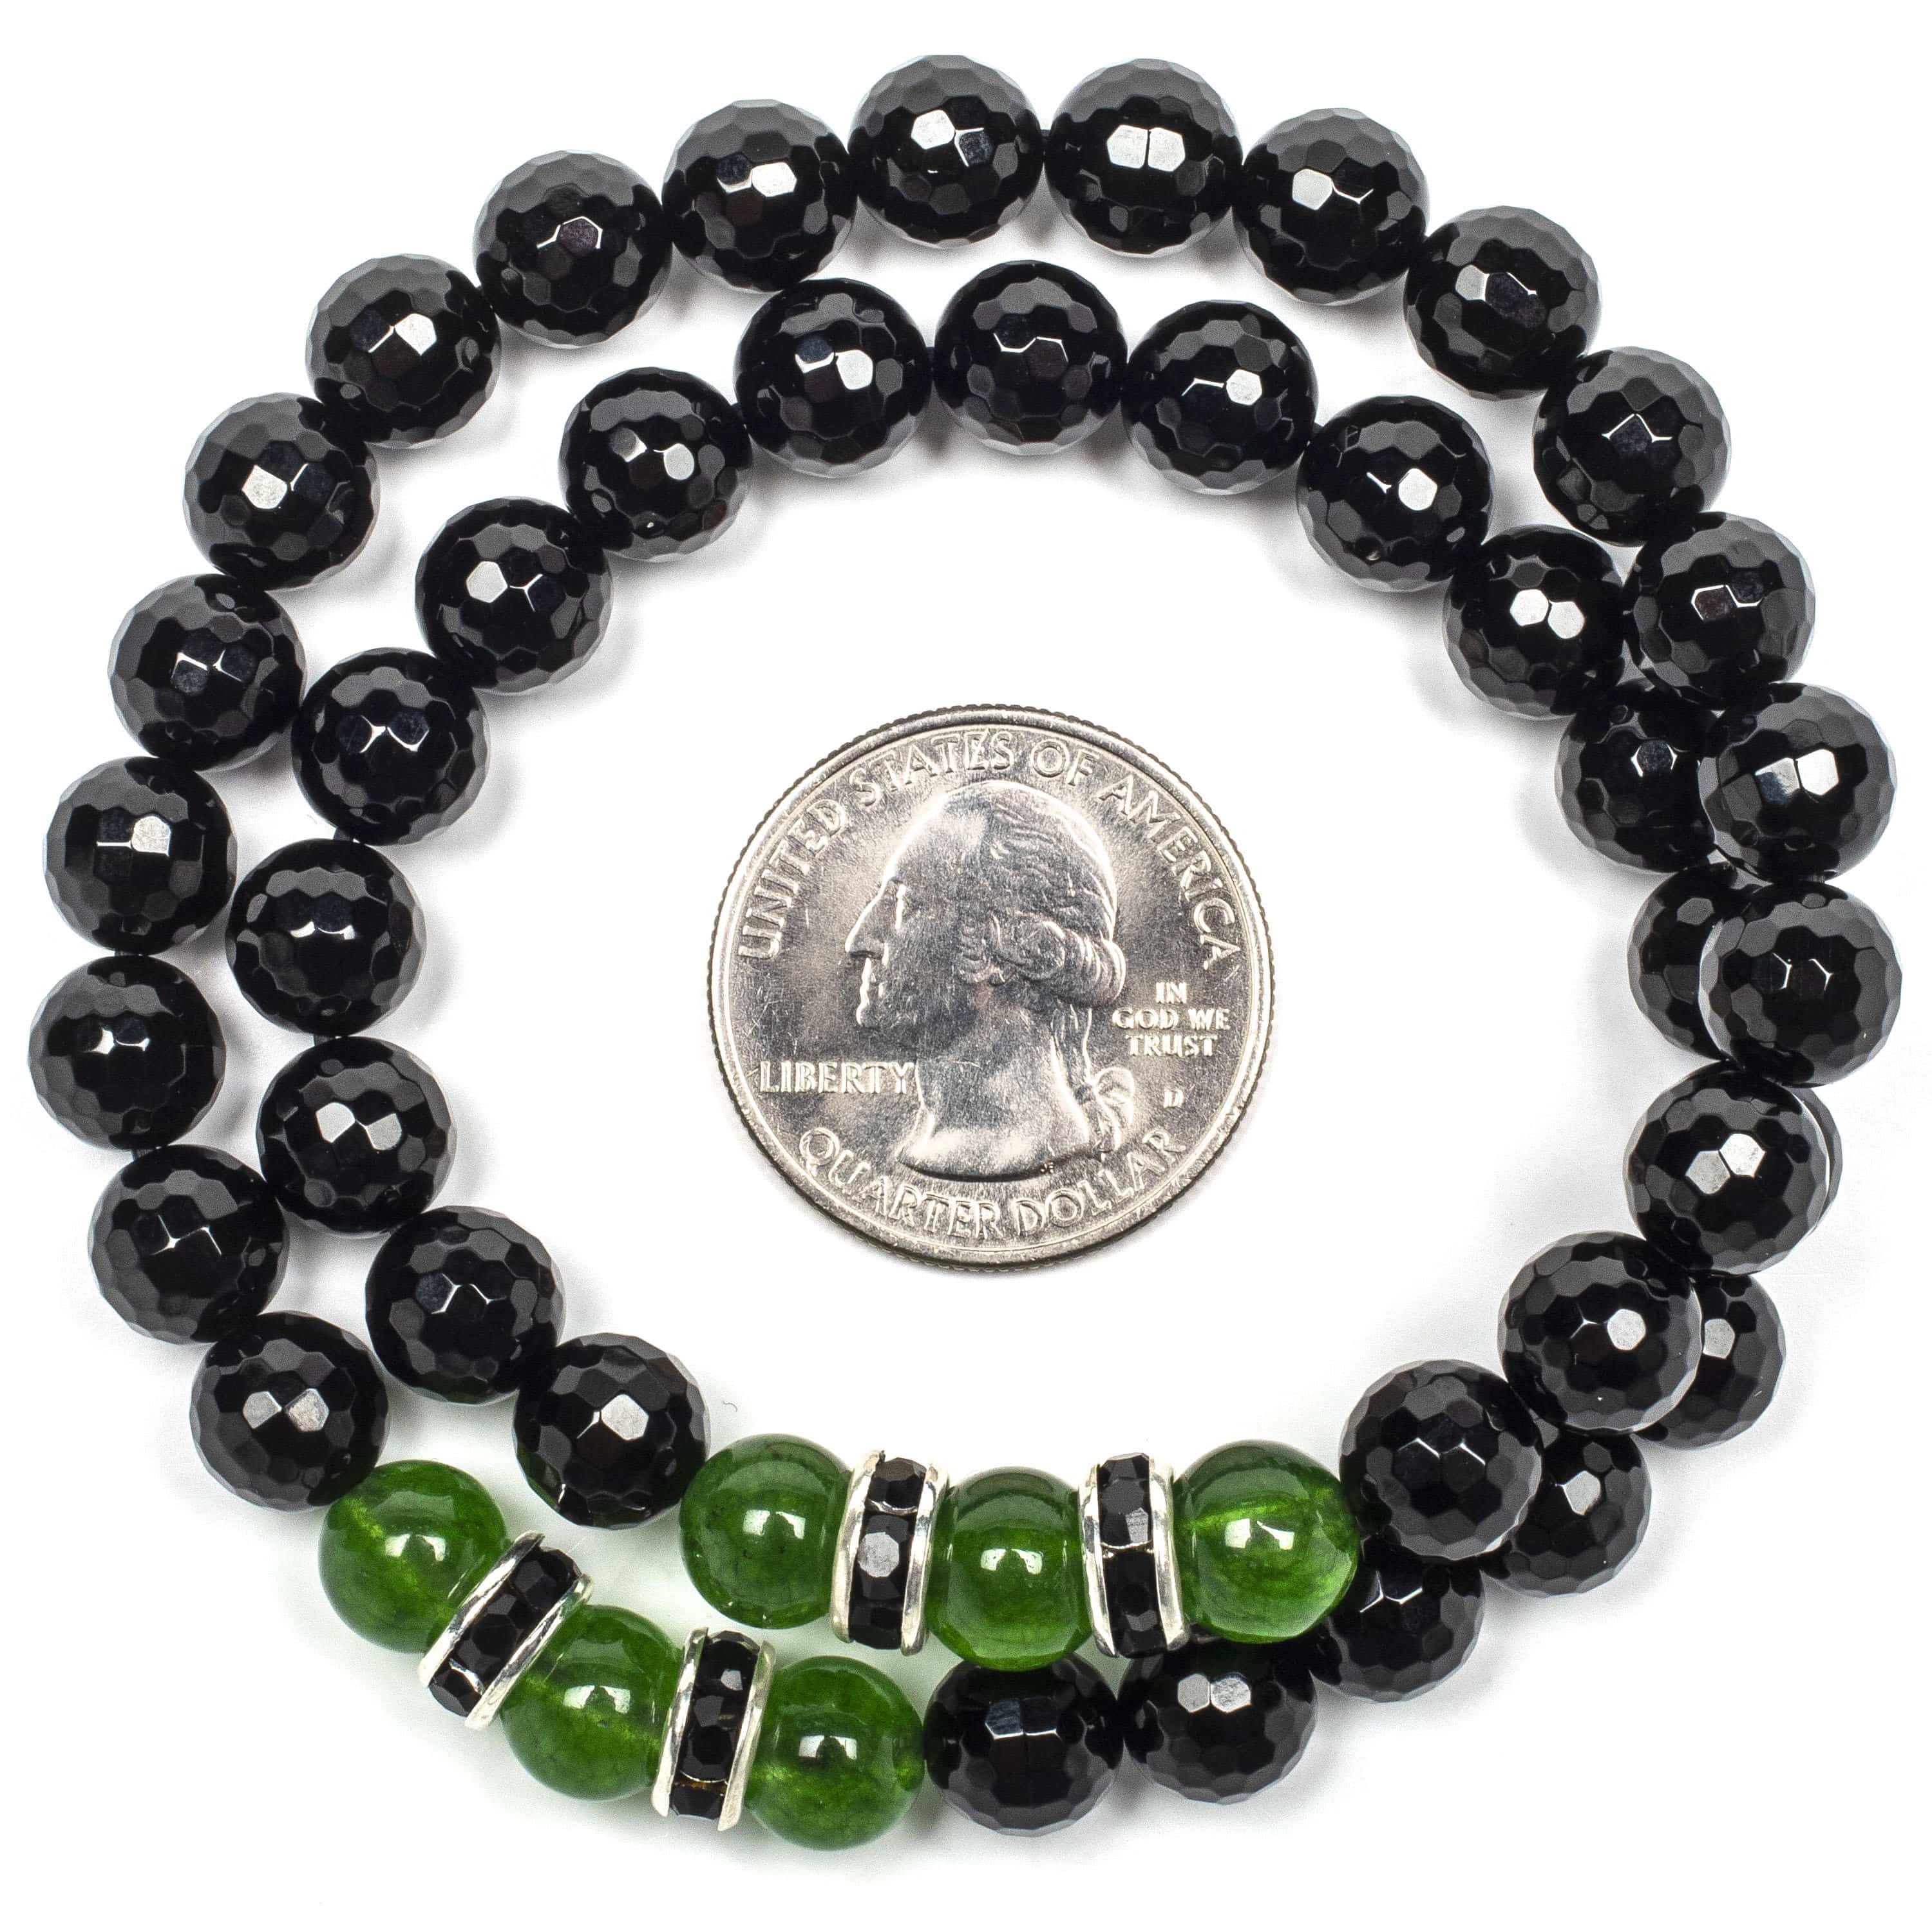 Kalifano Gemstone Bracelets Faceted Black Agate 8mm Beads with Aventurine and and Black and Silver Accent Beads Double Wrap Elastic Gemstone Bracelet WHITE-BGI2-037